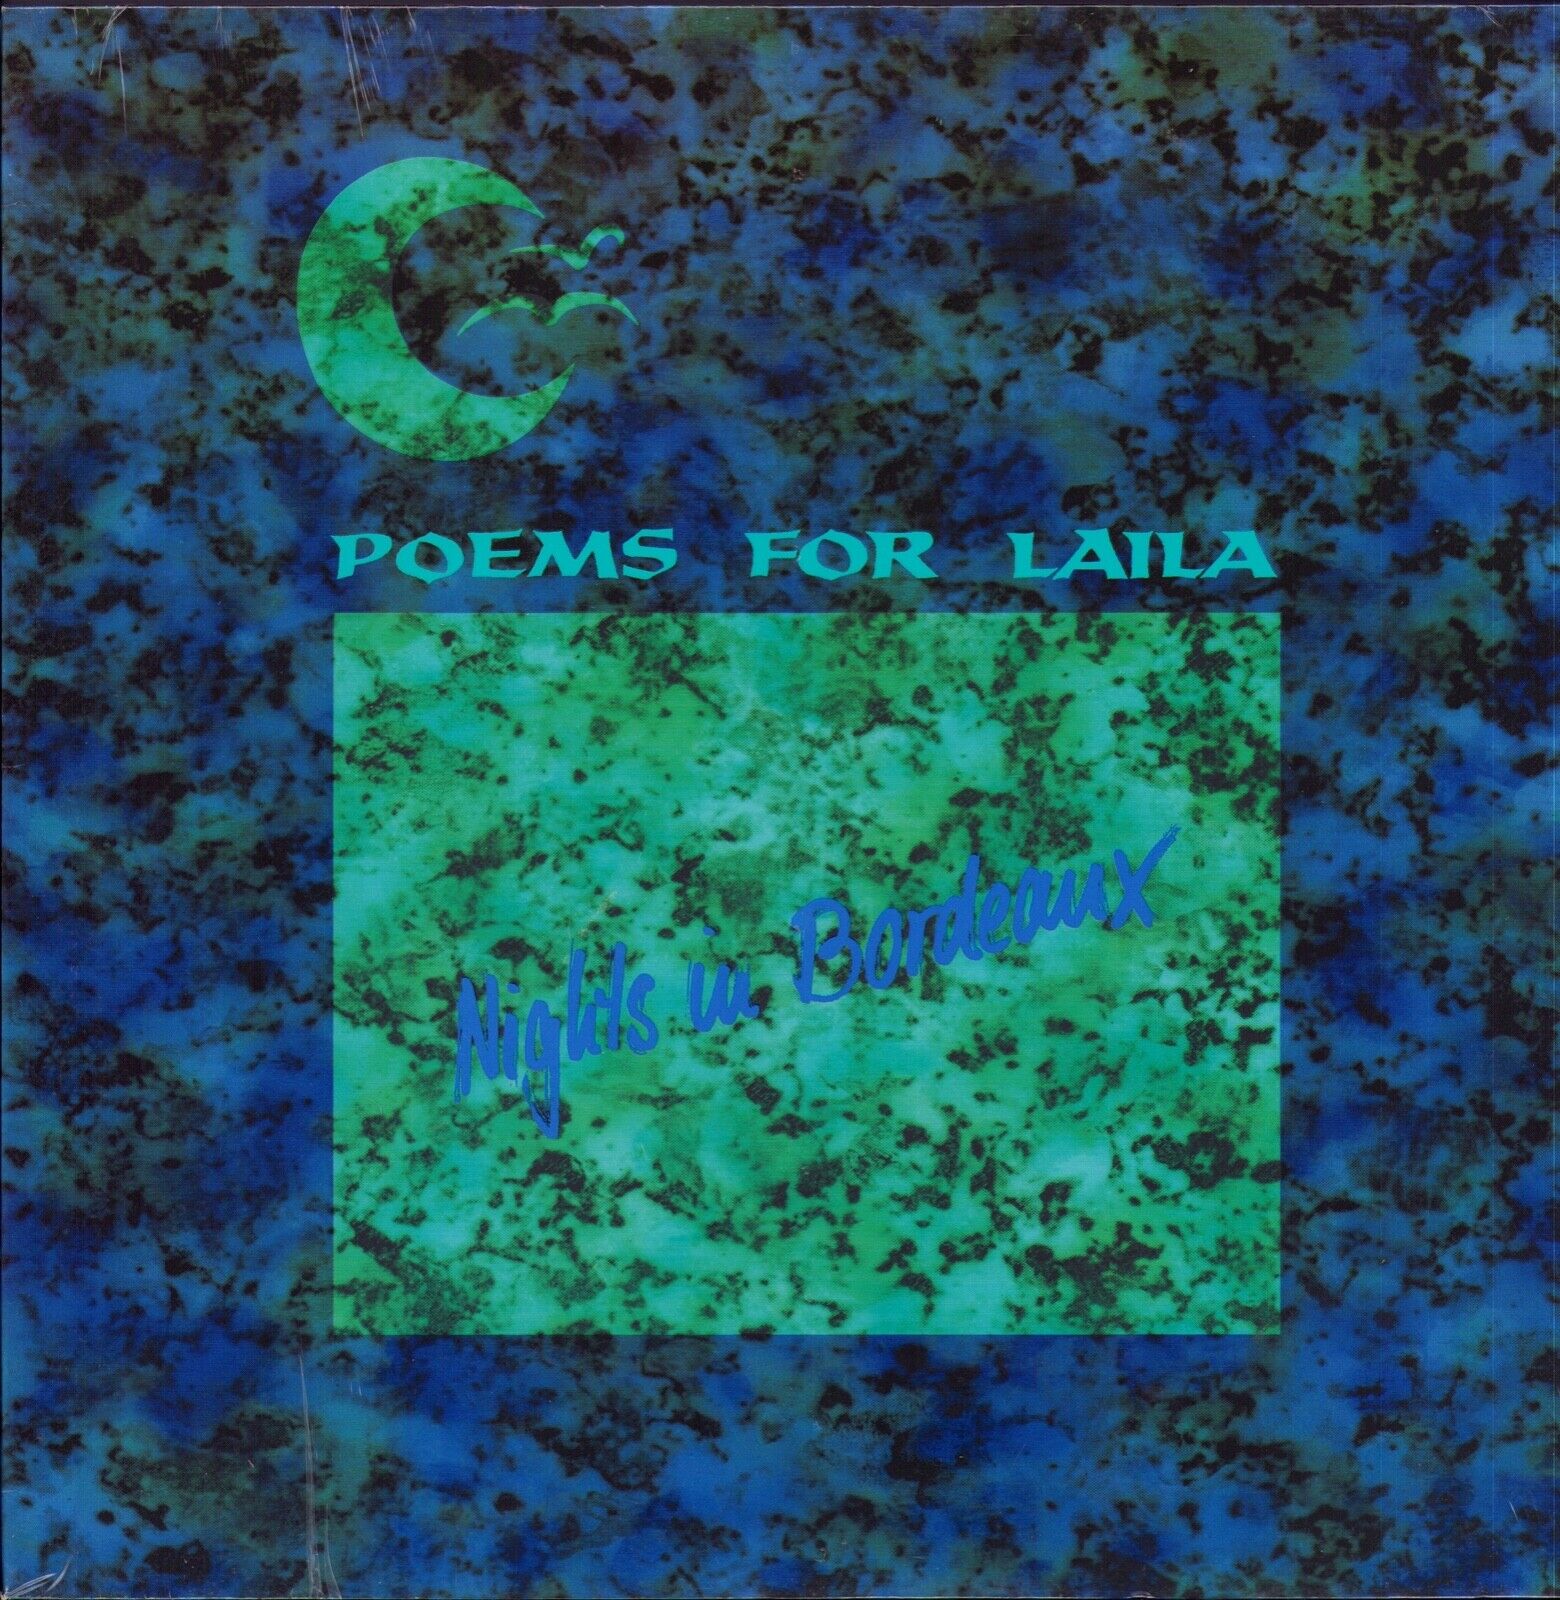 Poems For Laila ‎- Nights In Bordeaux Vinyl 12"